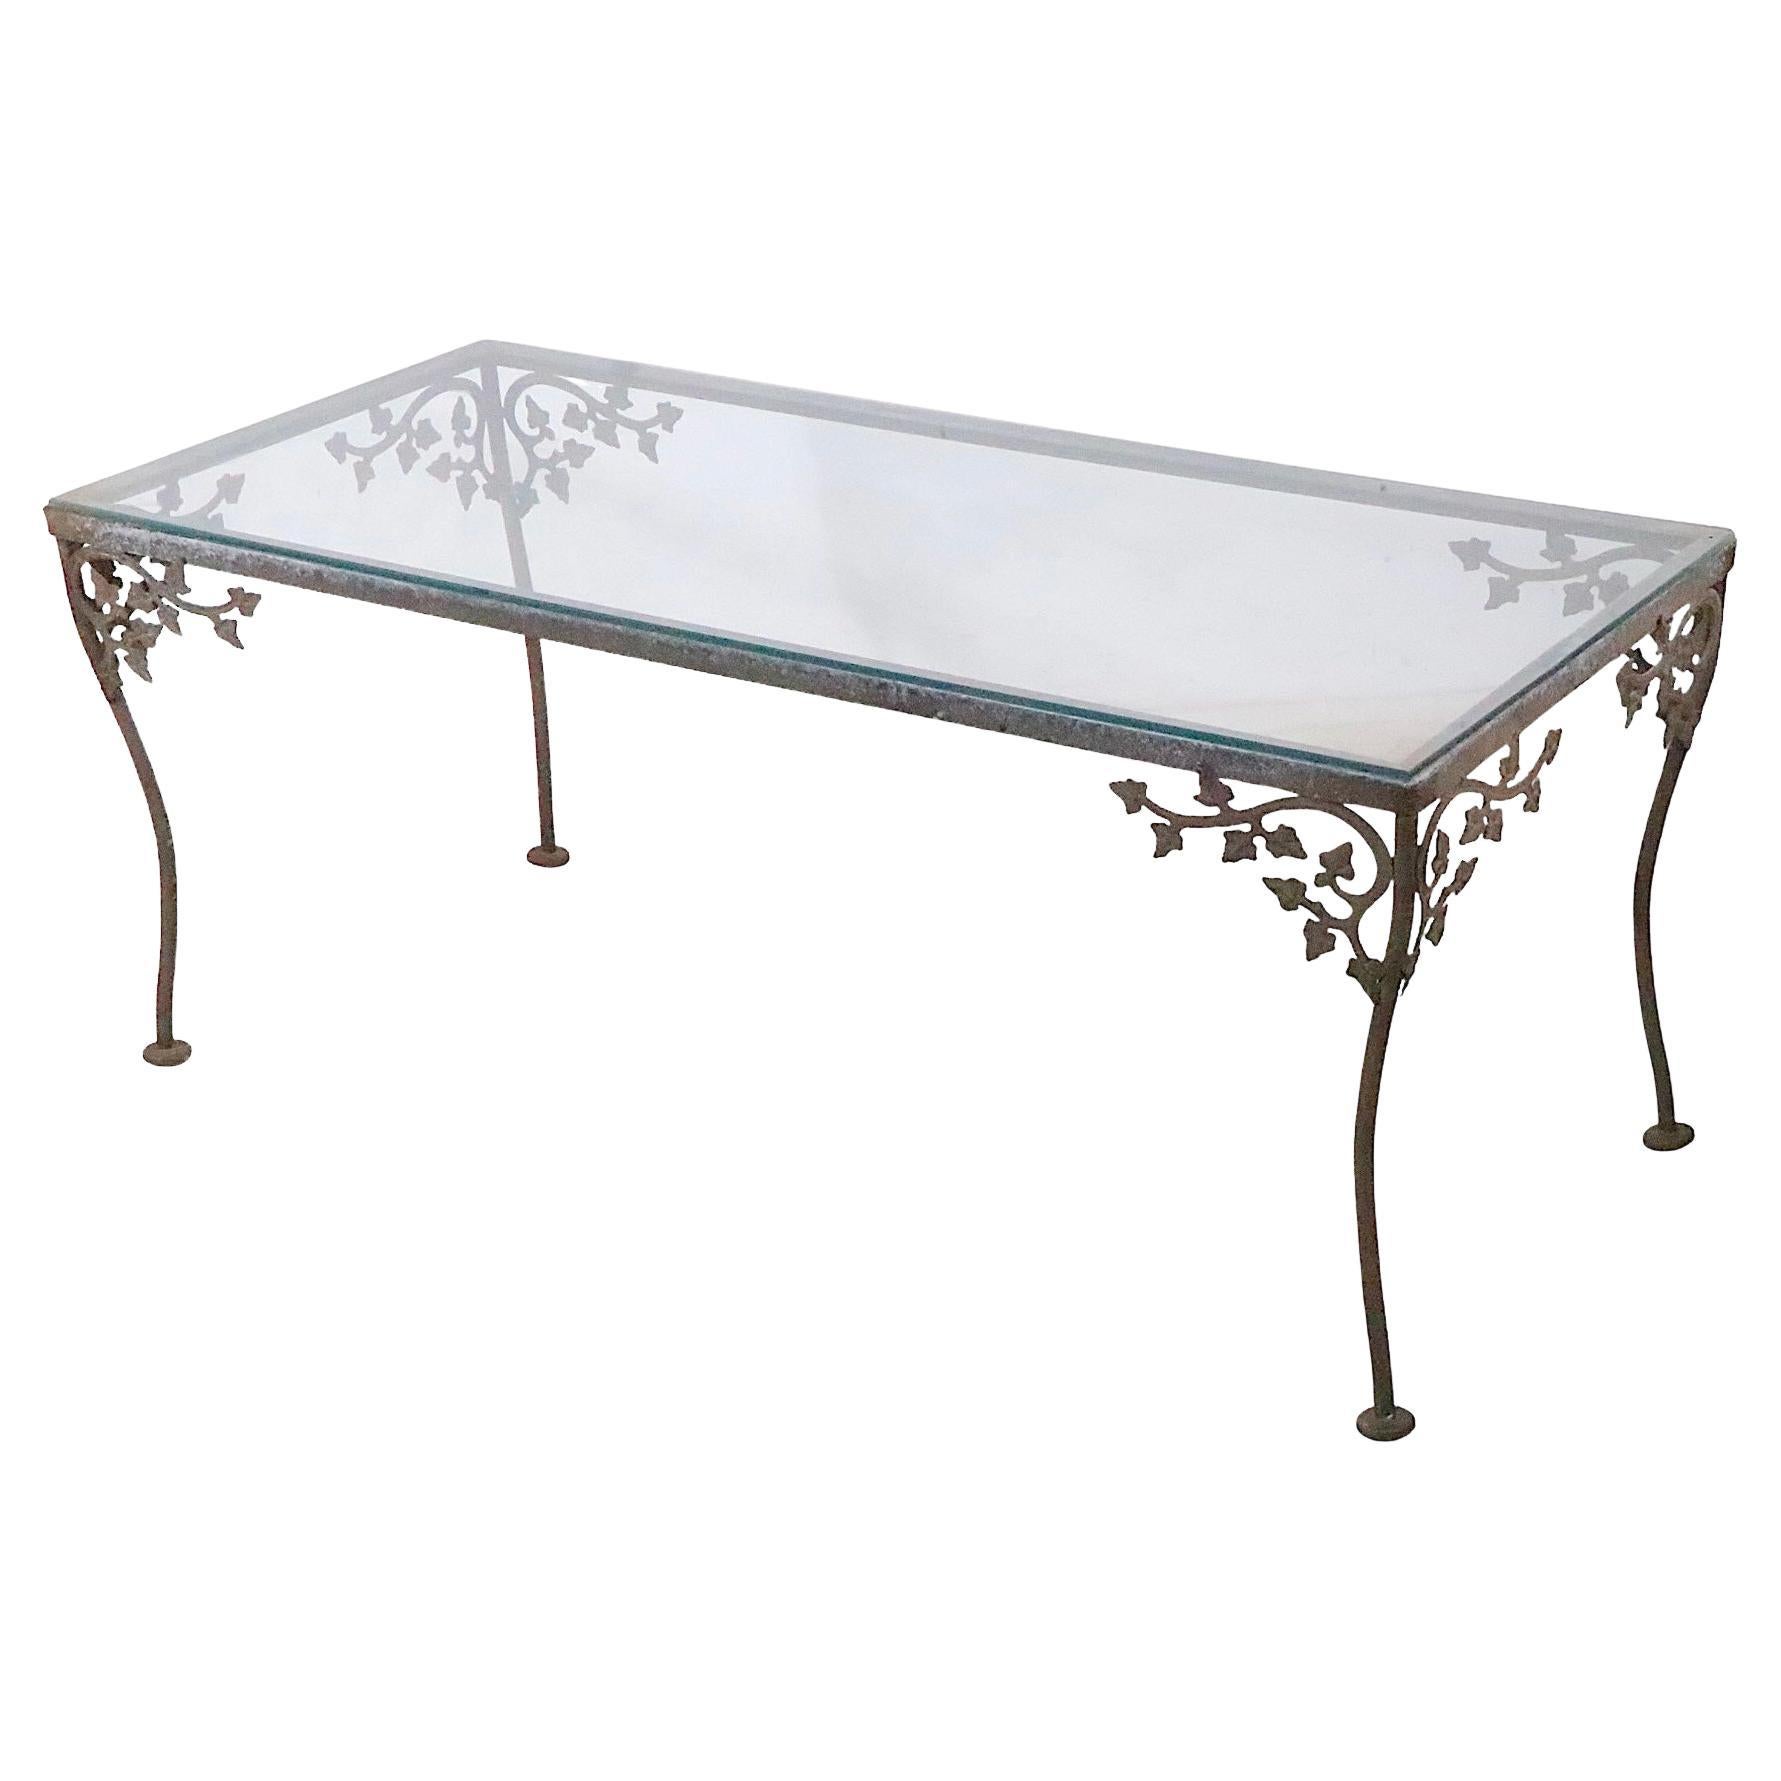 Wrought Iron Metal and Glass Coffee Table at. to Woodard Orleans For Sale